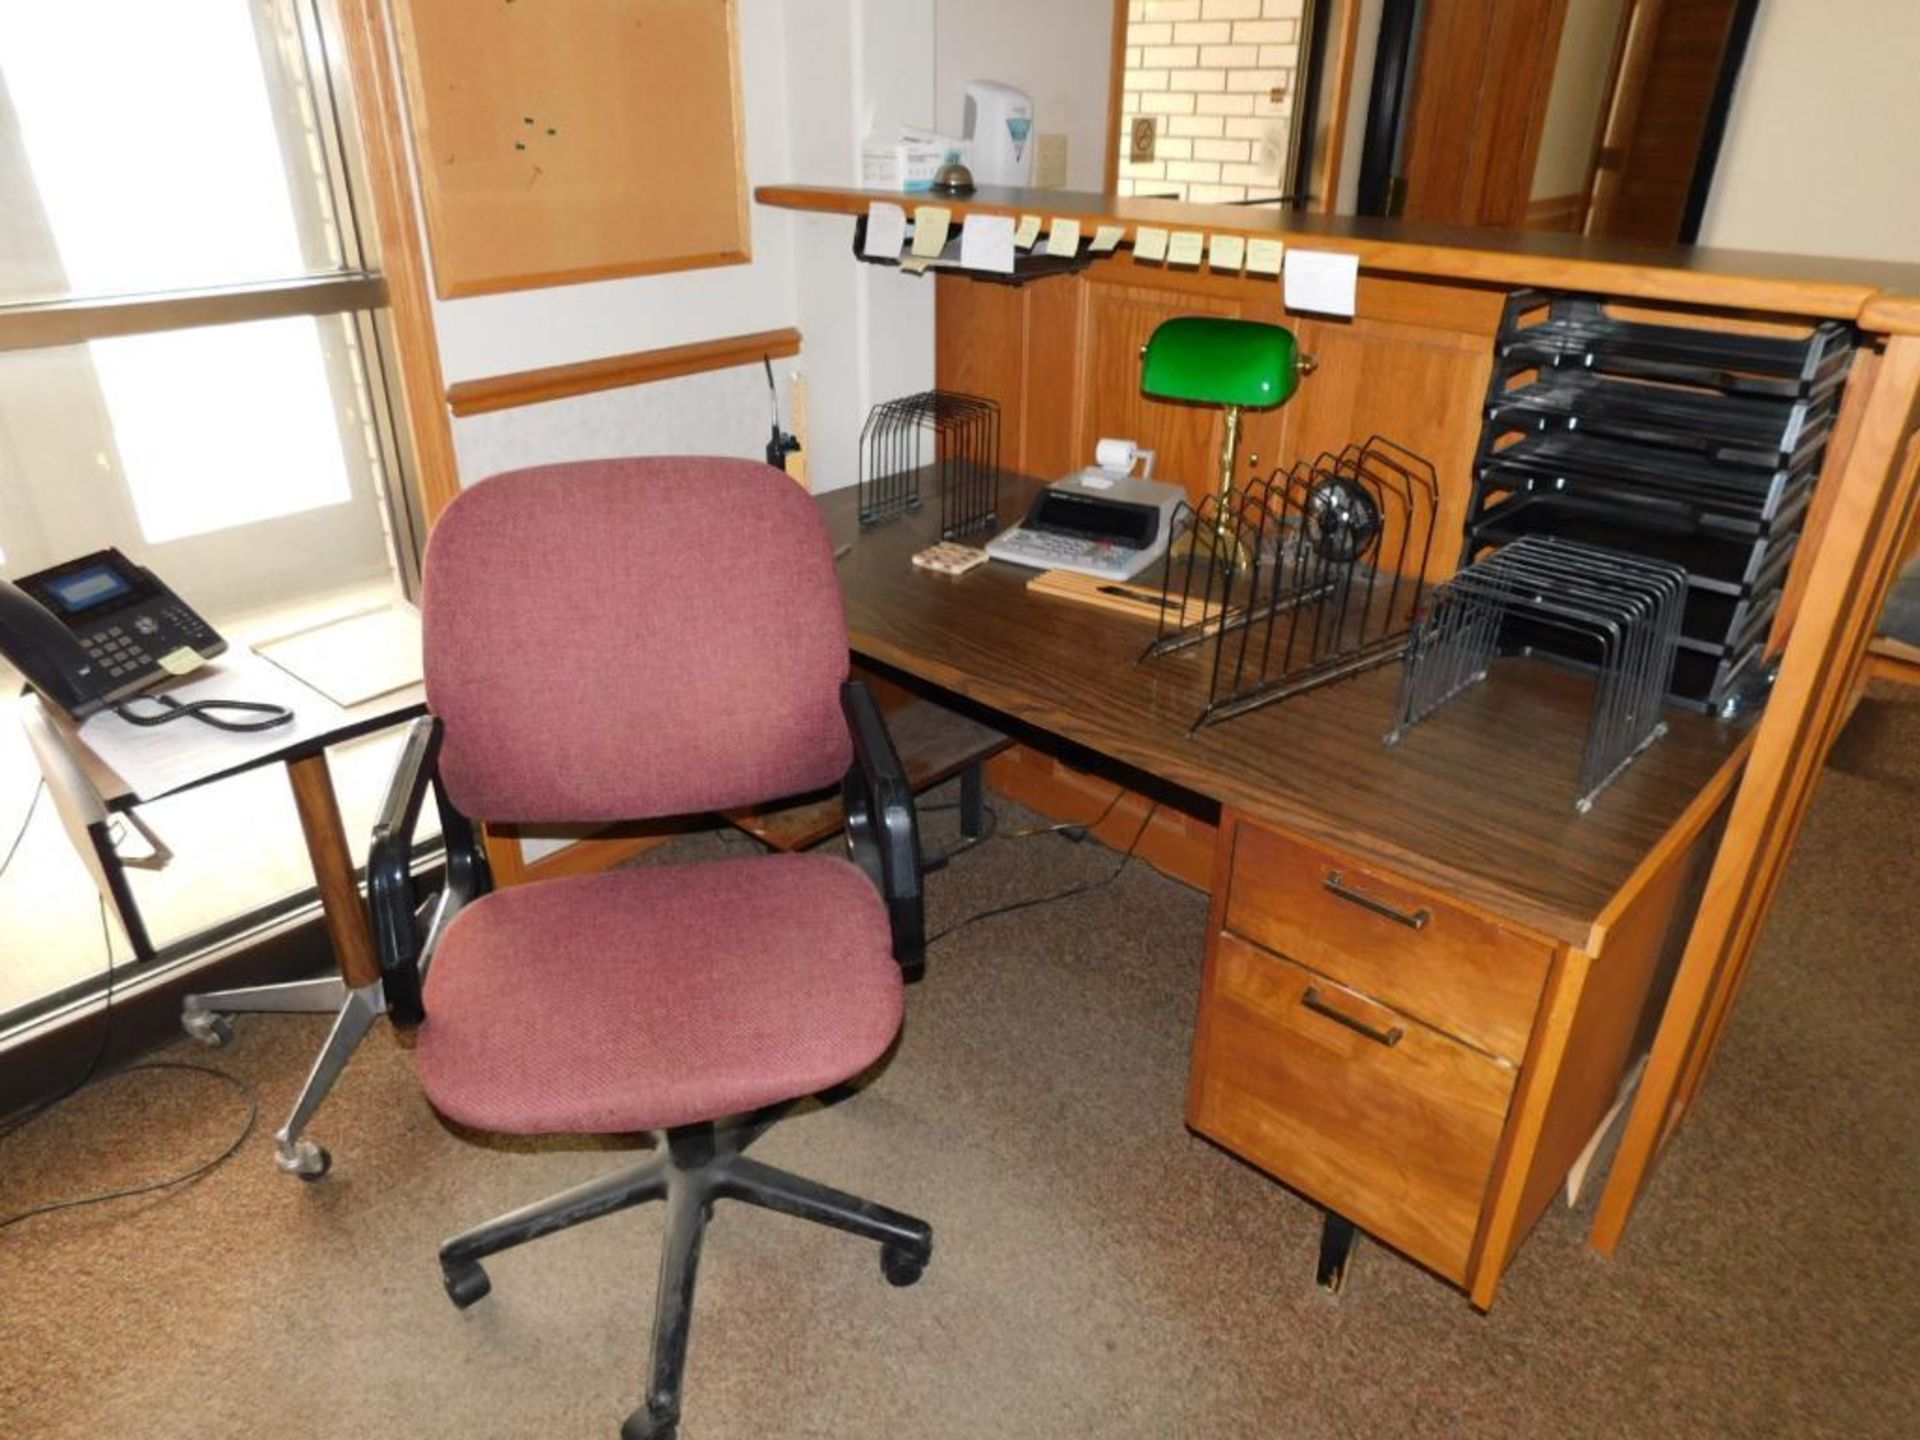 LOT: Contents of Main Office (NO ART, NO ELECTRONICS, NOTHING ATTACHED TO WALLS) - Image 16 of 27